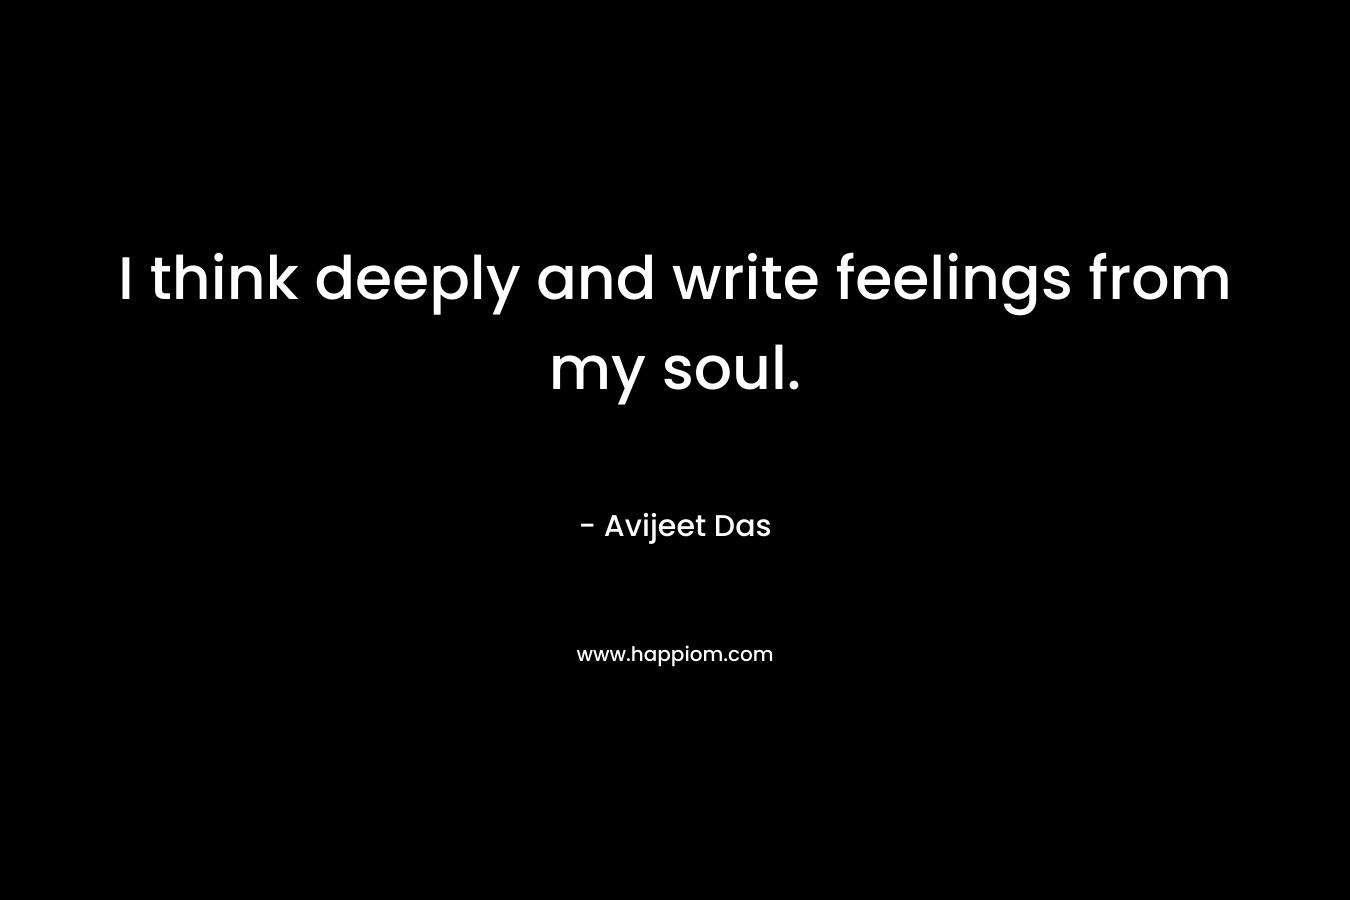 I think deeply and write feelings from my soul.